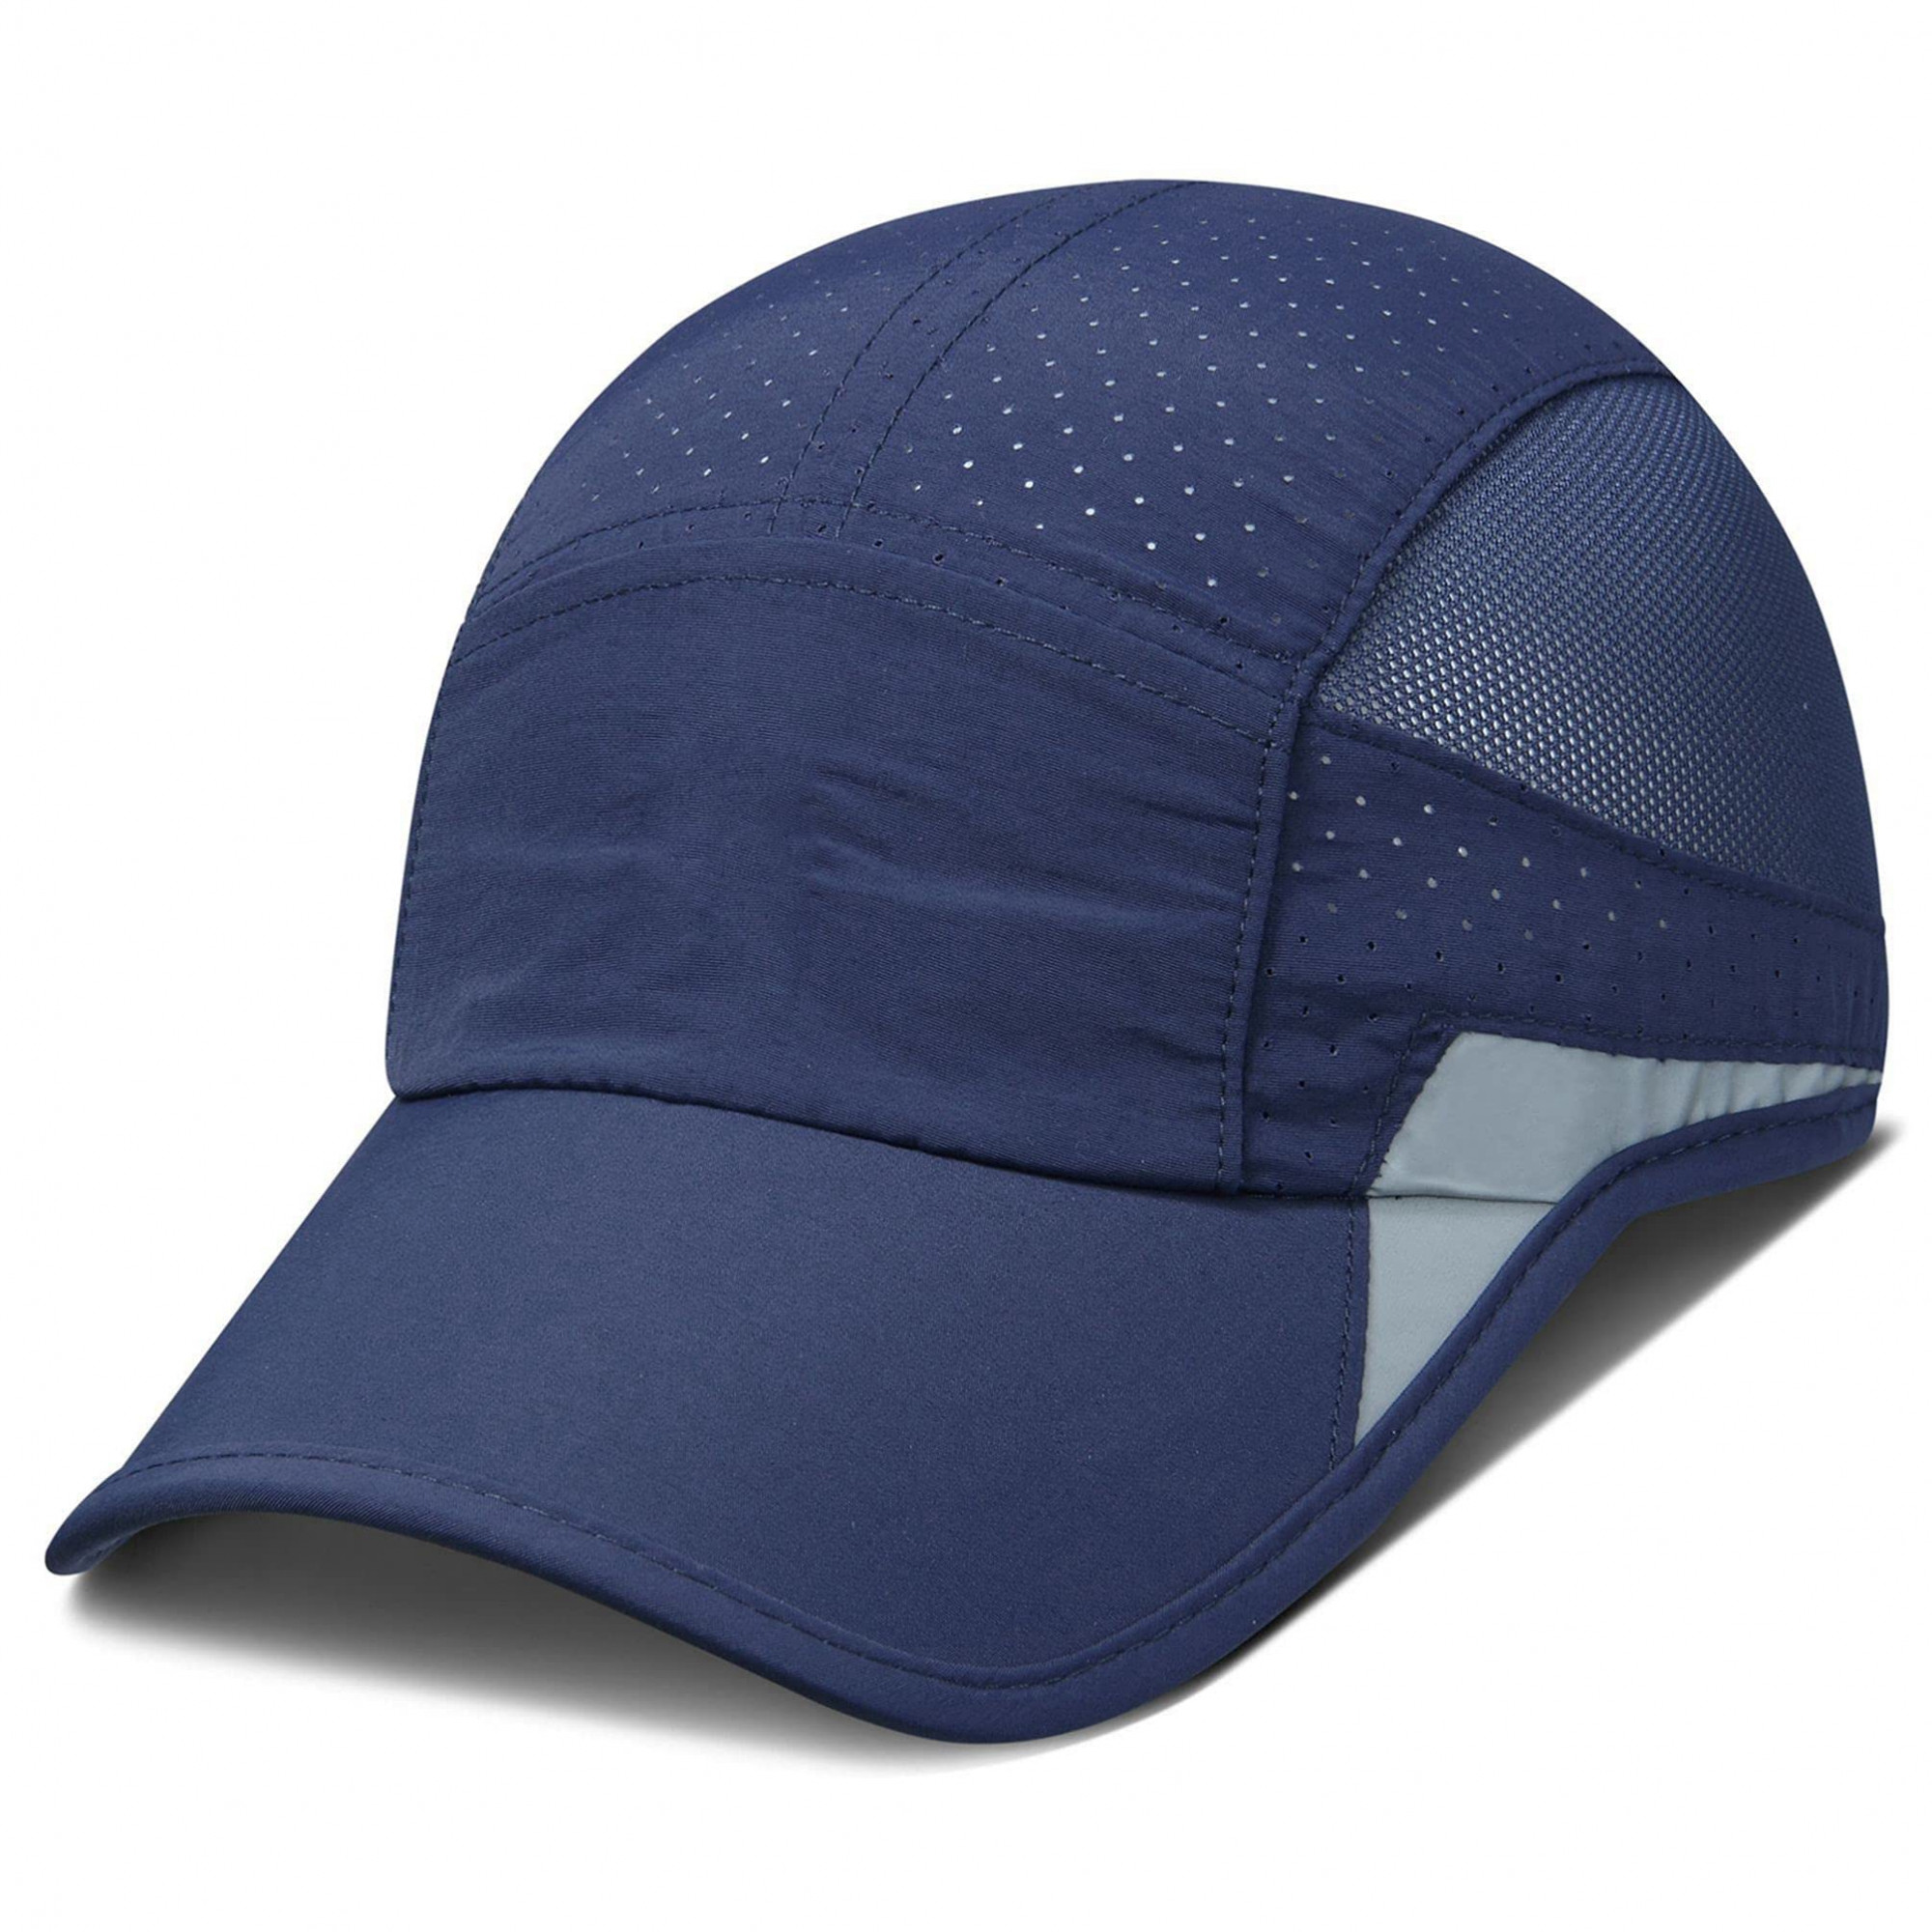 https://www.fastemi.com/uploads/fastemicom/products/hsr-unstructured-reflective-lightweight-breathable-stylish-sports-soft-hat-cap-for-men-and-women-navy-bluesize-free-size-274578591439719_l.jpg